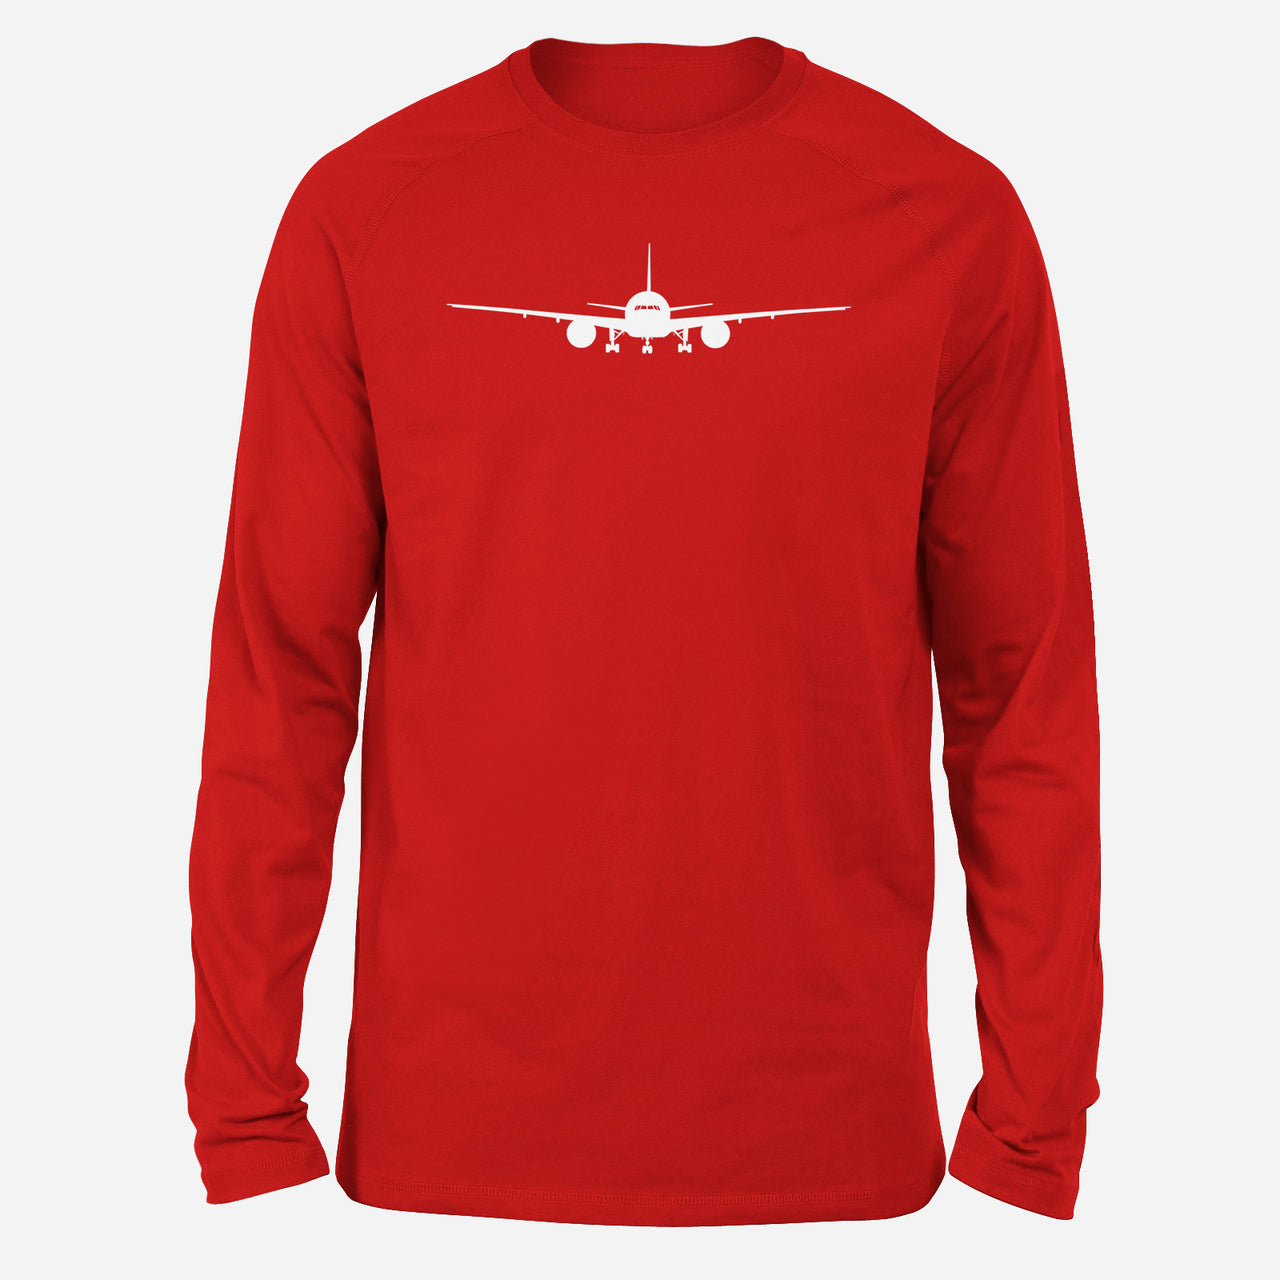 Boeing 777 Silhouette Designed Long-Sleeve T-Shirts